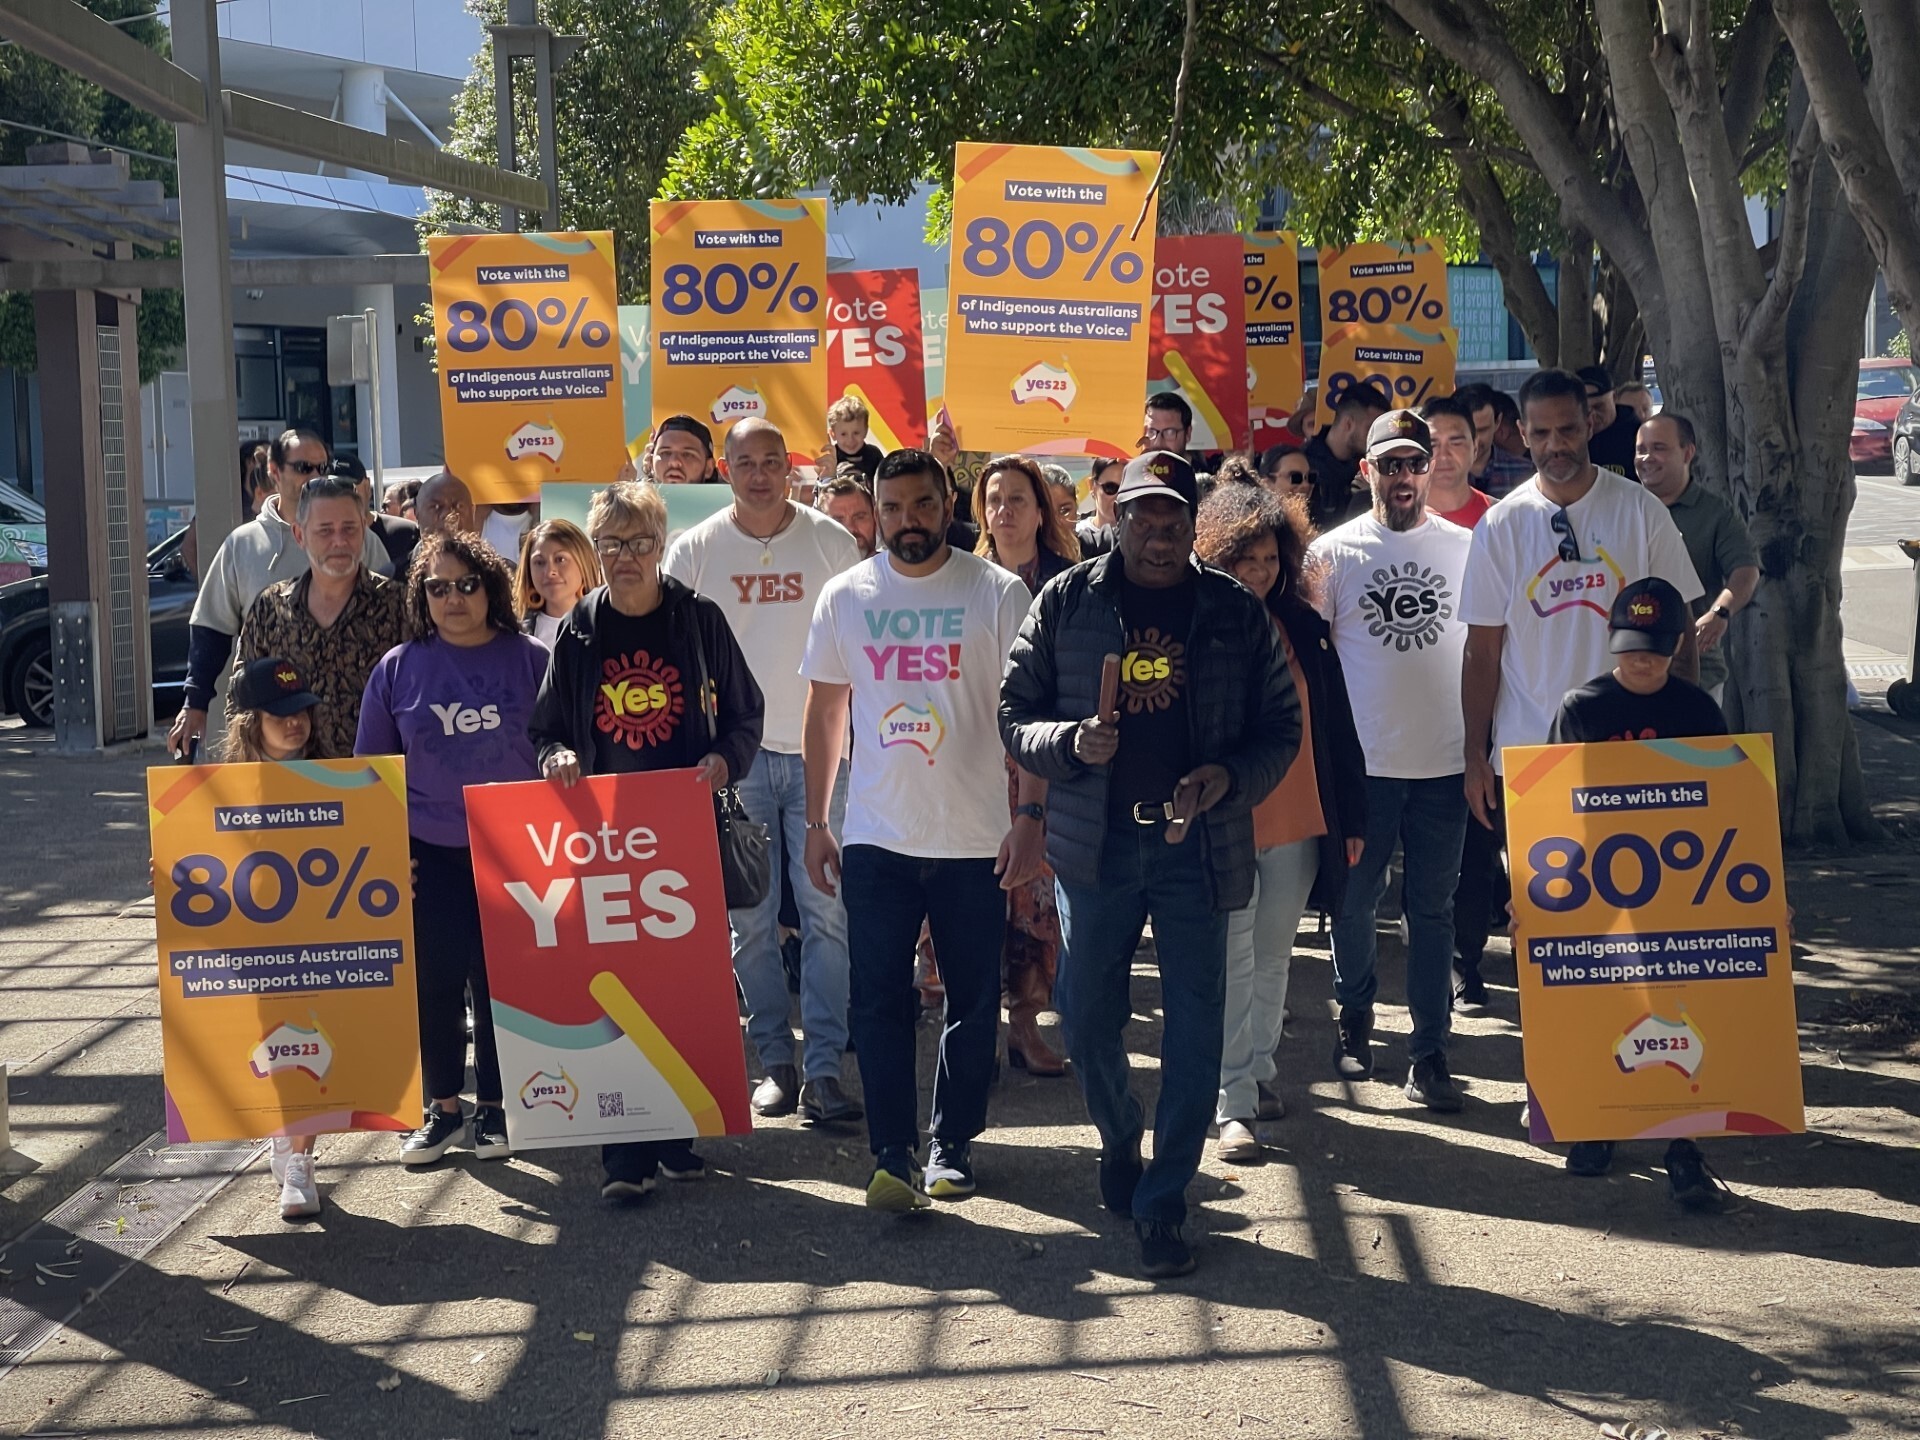 A Yes rally walks the street holding Vote Yes signs.